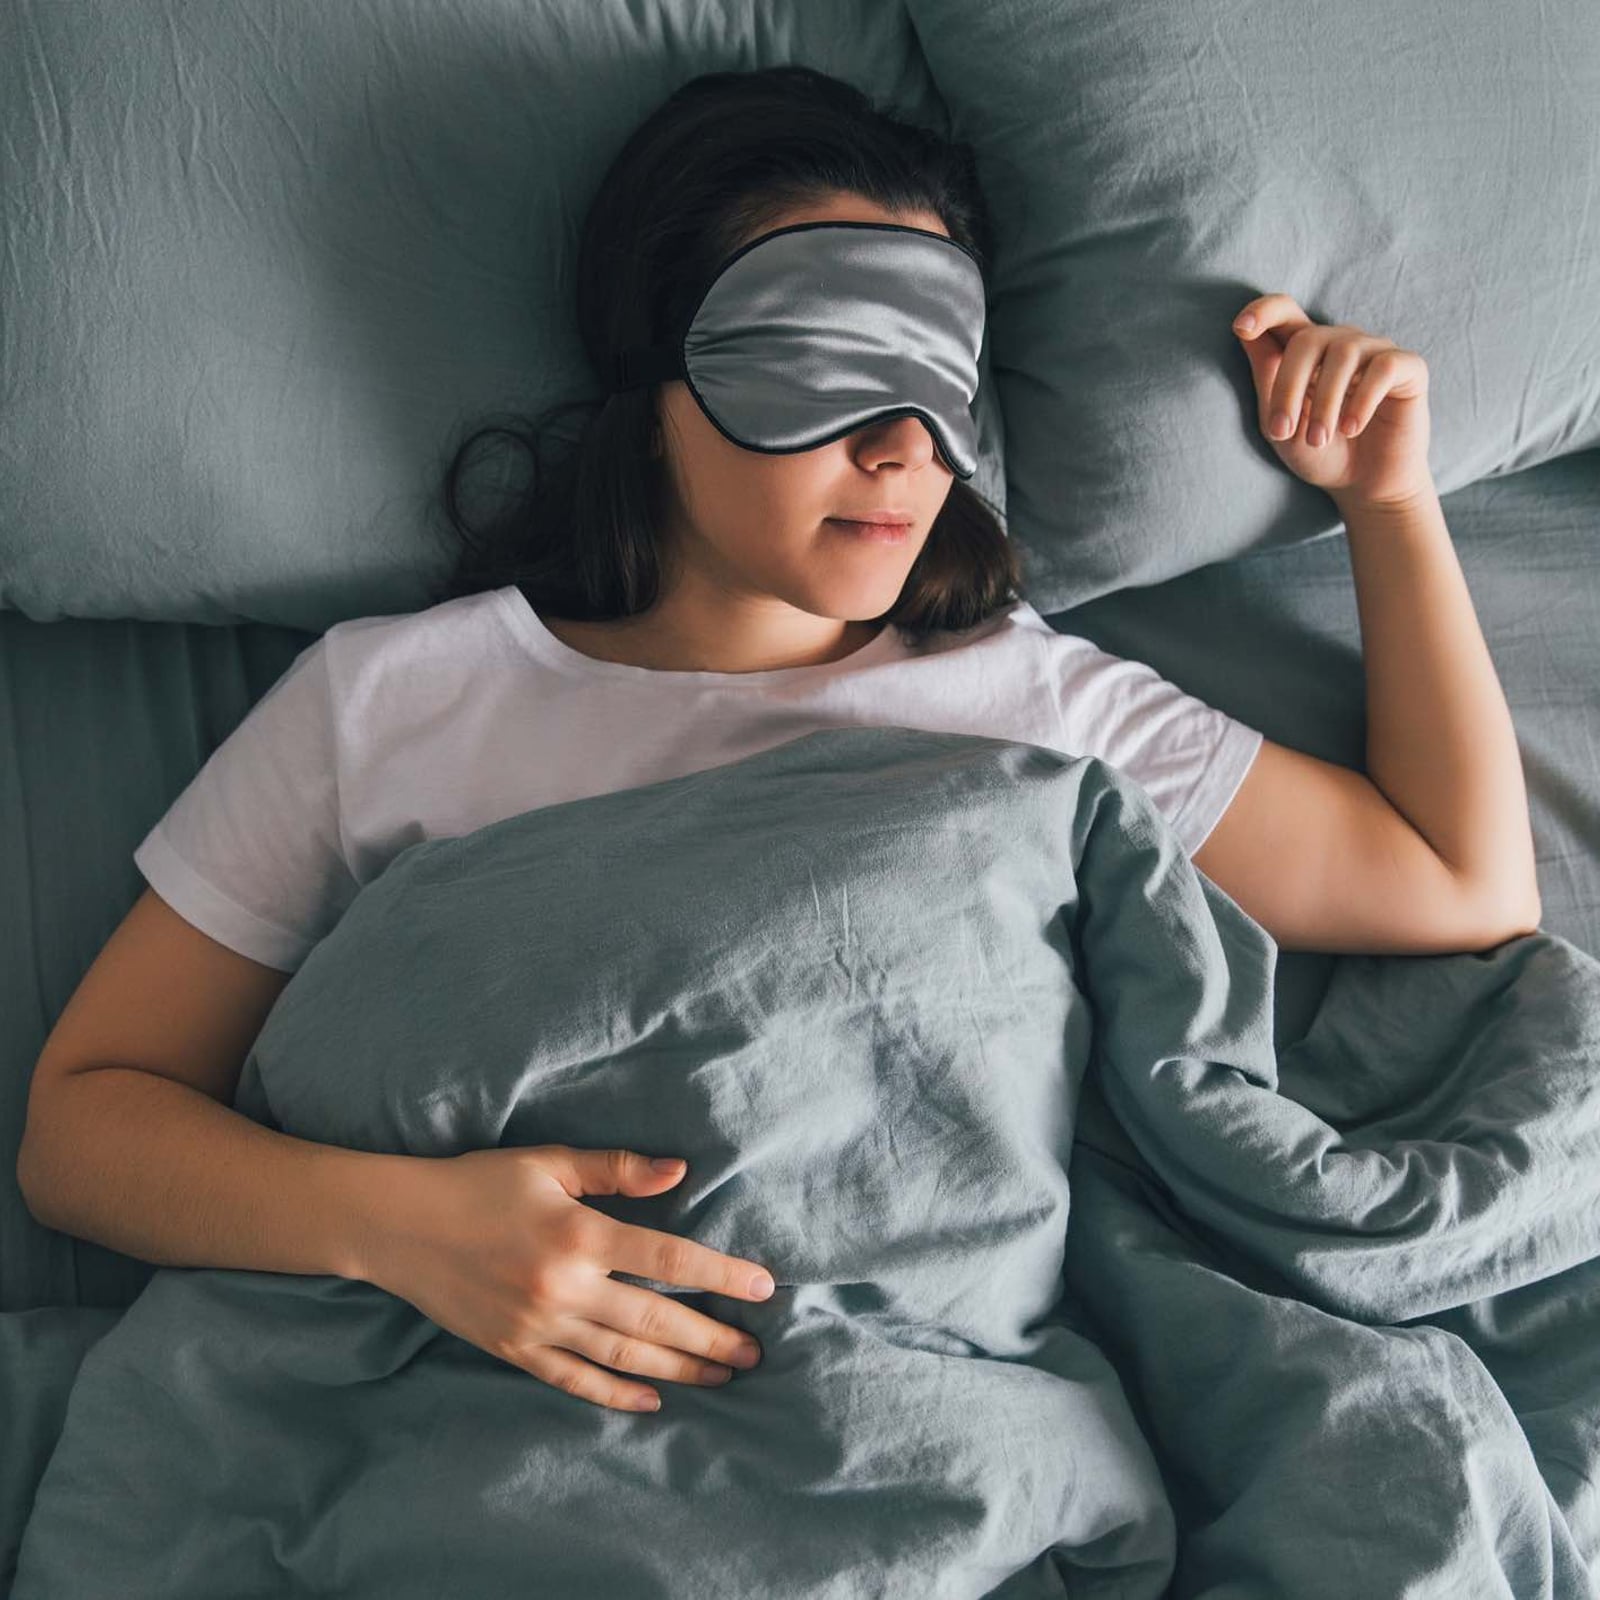 Women and Sleep: Key Differences and Tips for Healthy Rest